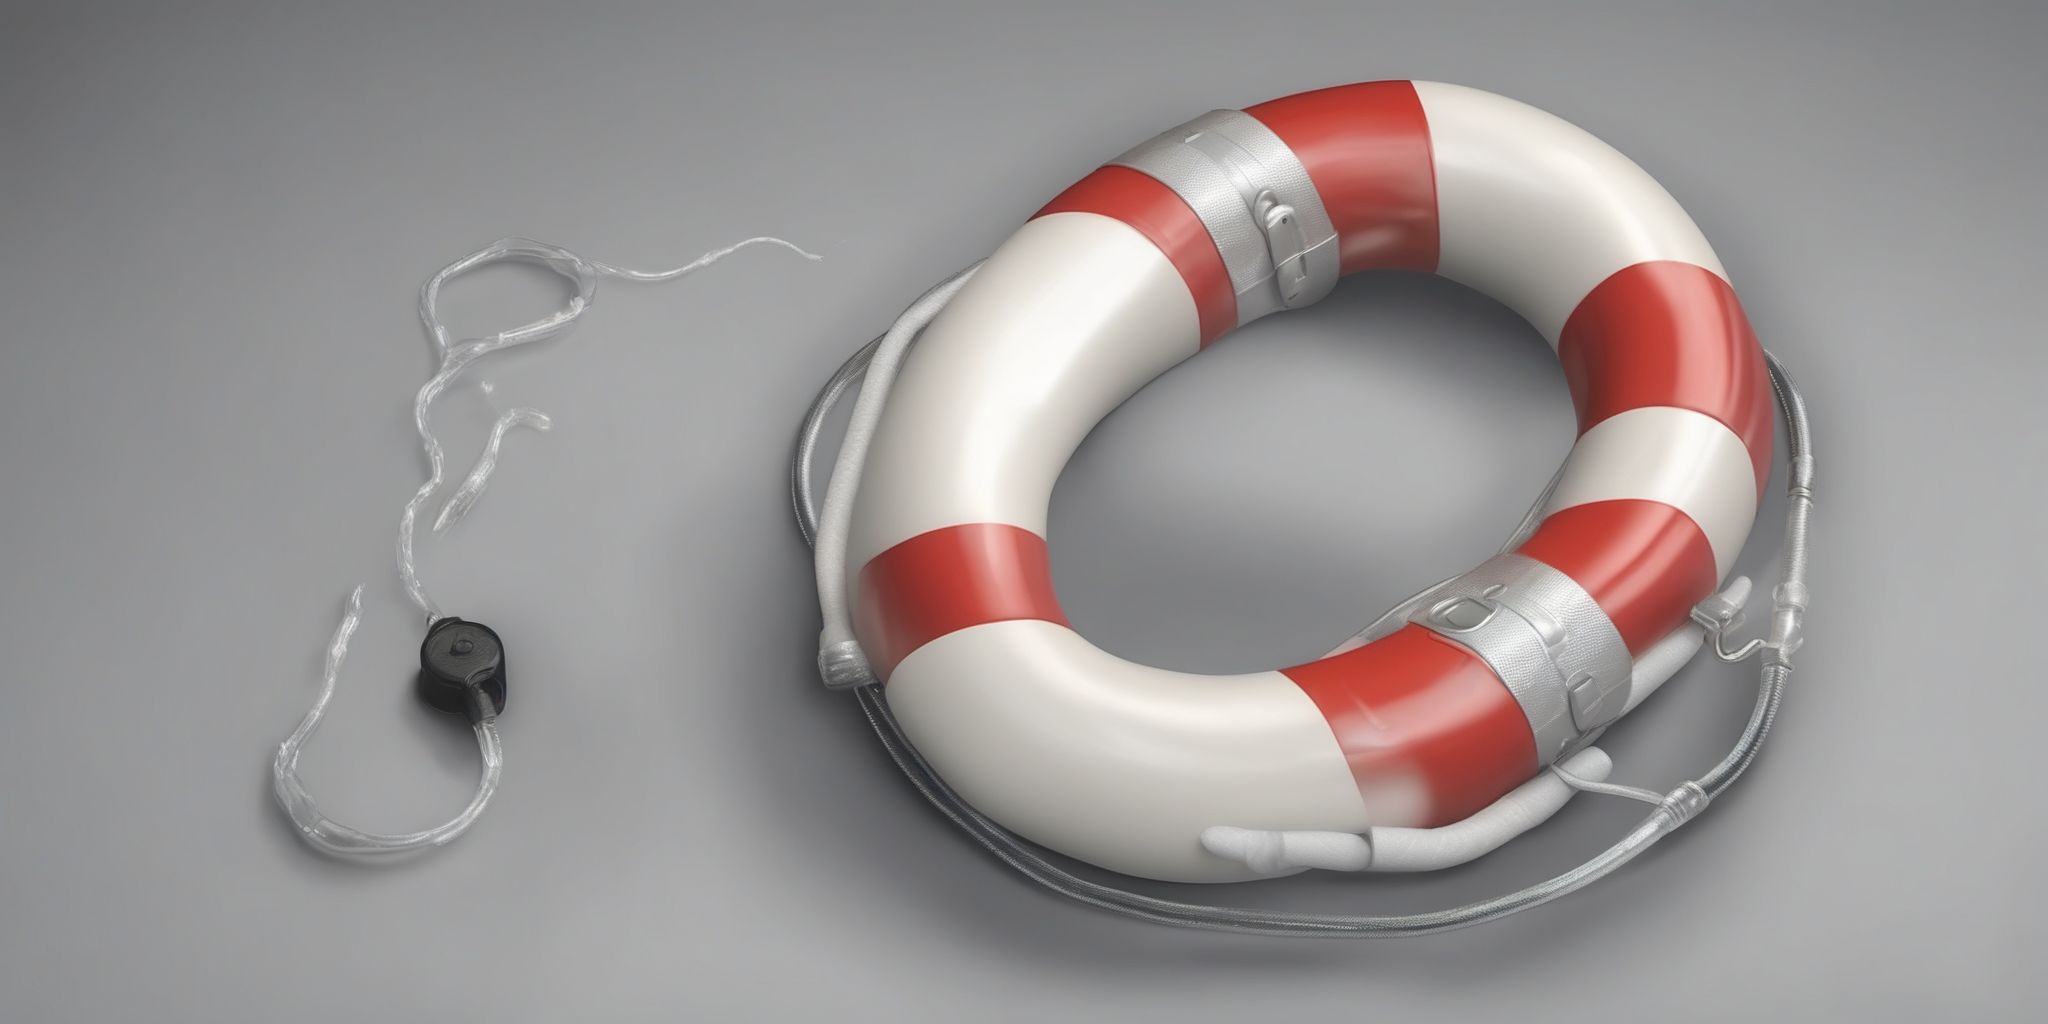 Lifesaver  in realistic, photographic style